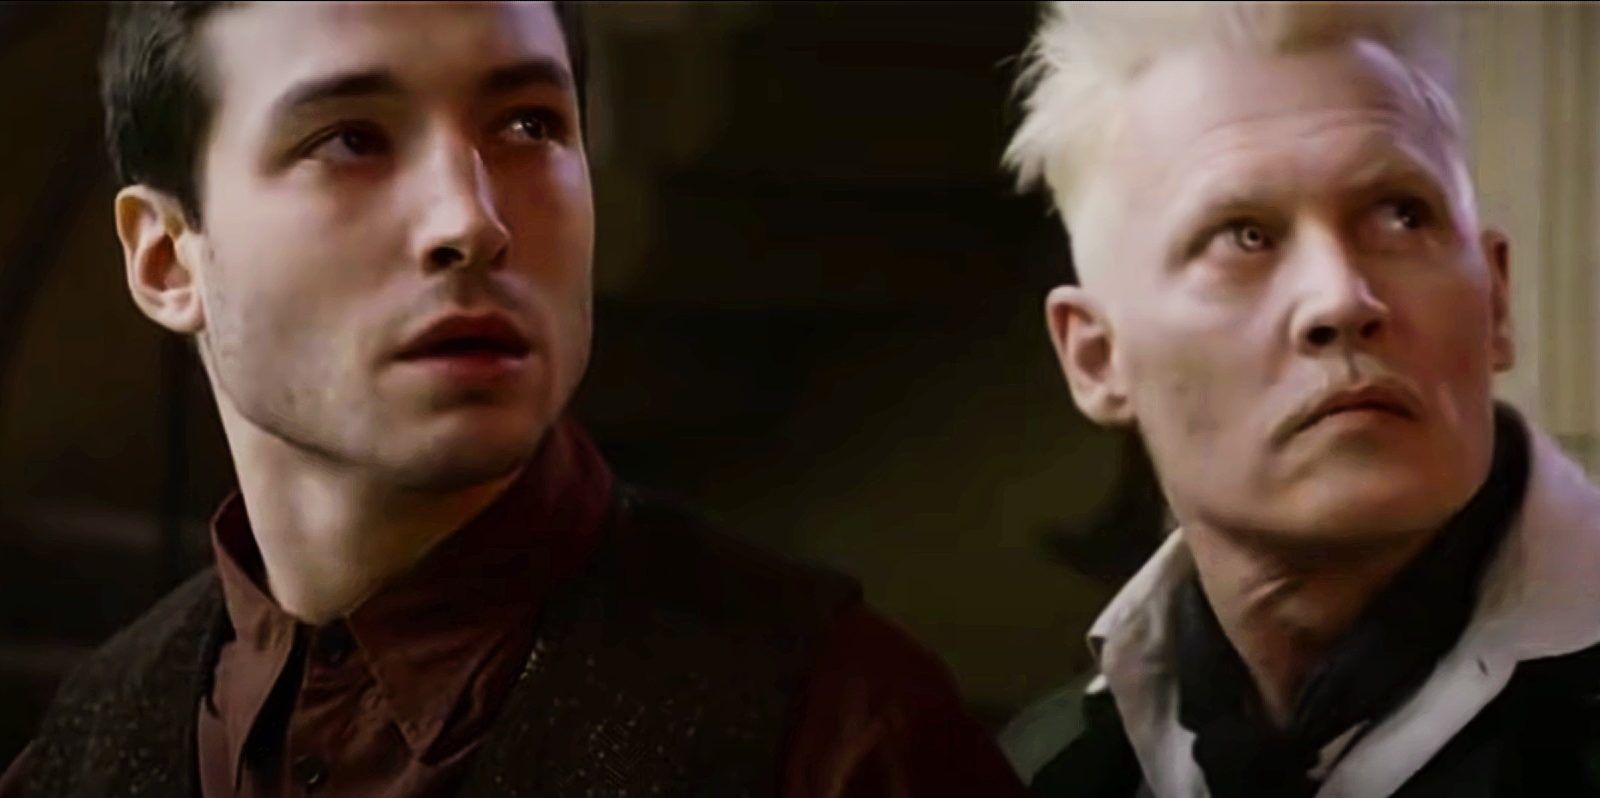 Fantastic Beasts 3 Already Hinted At Another Credence Identity Twist